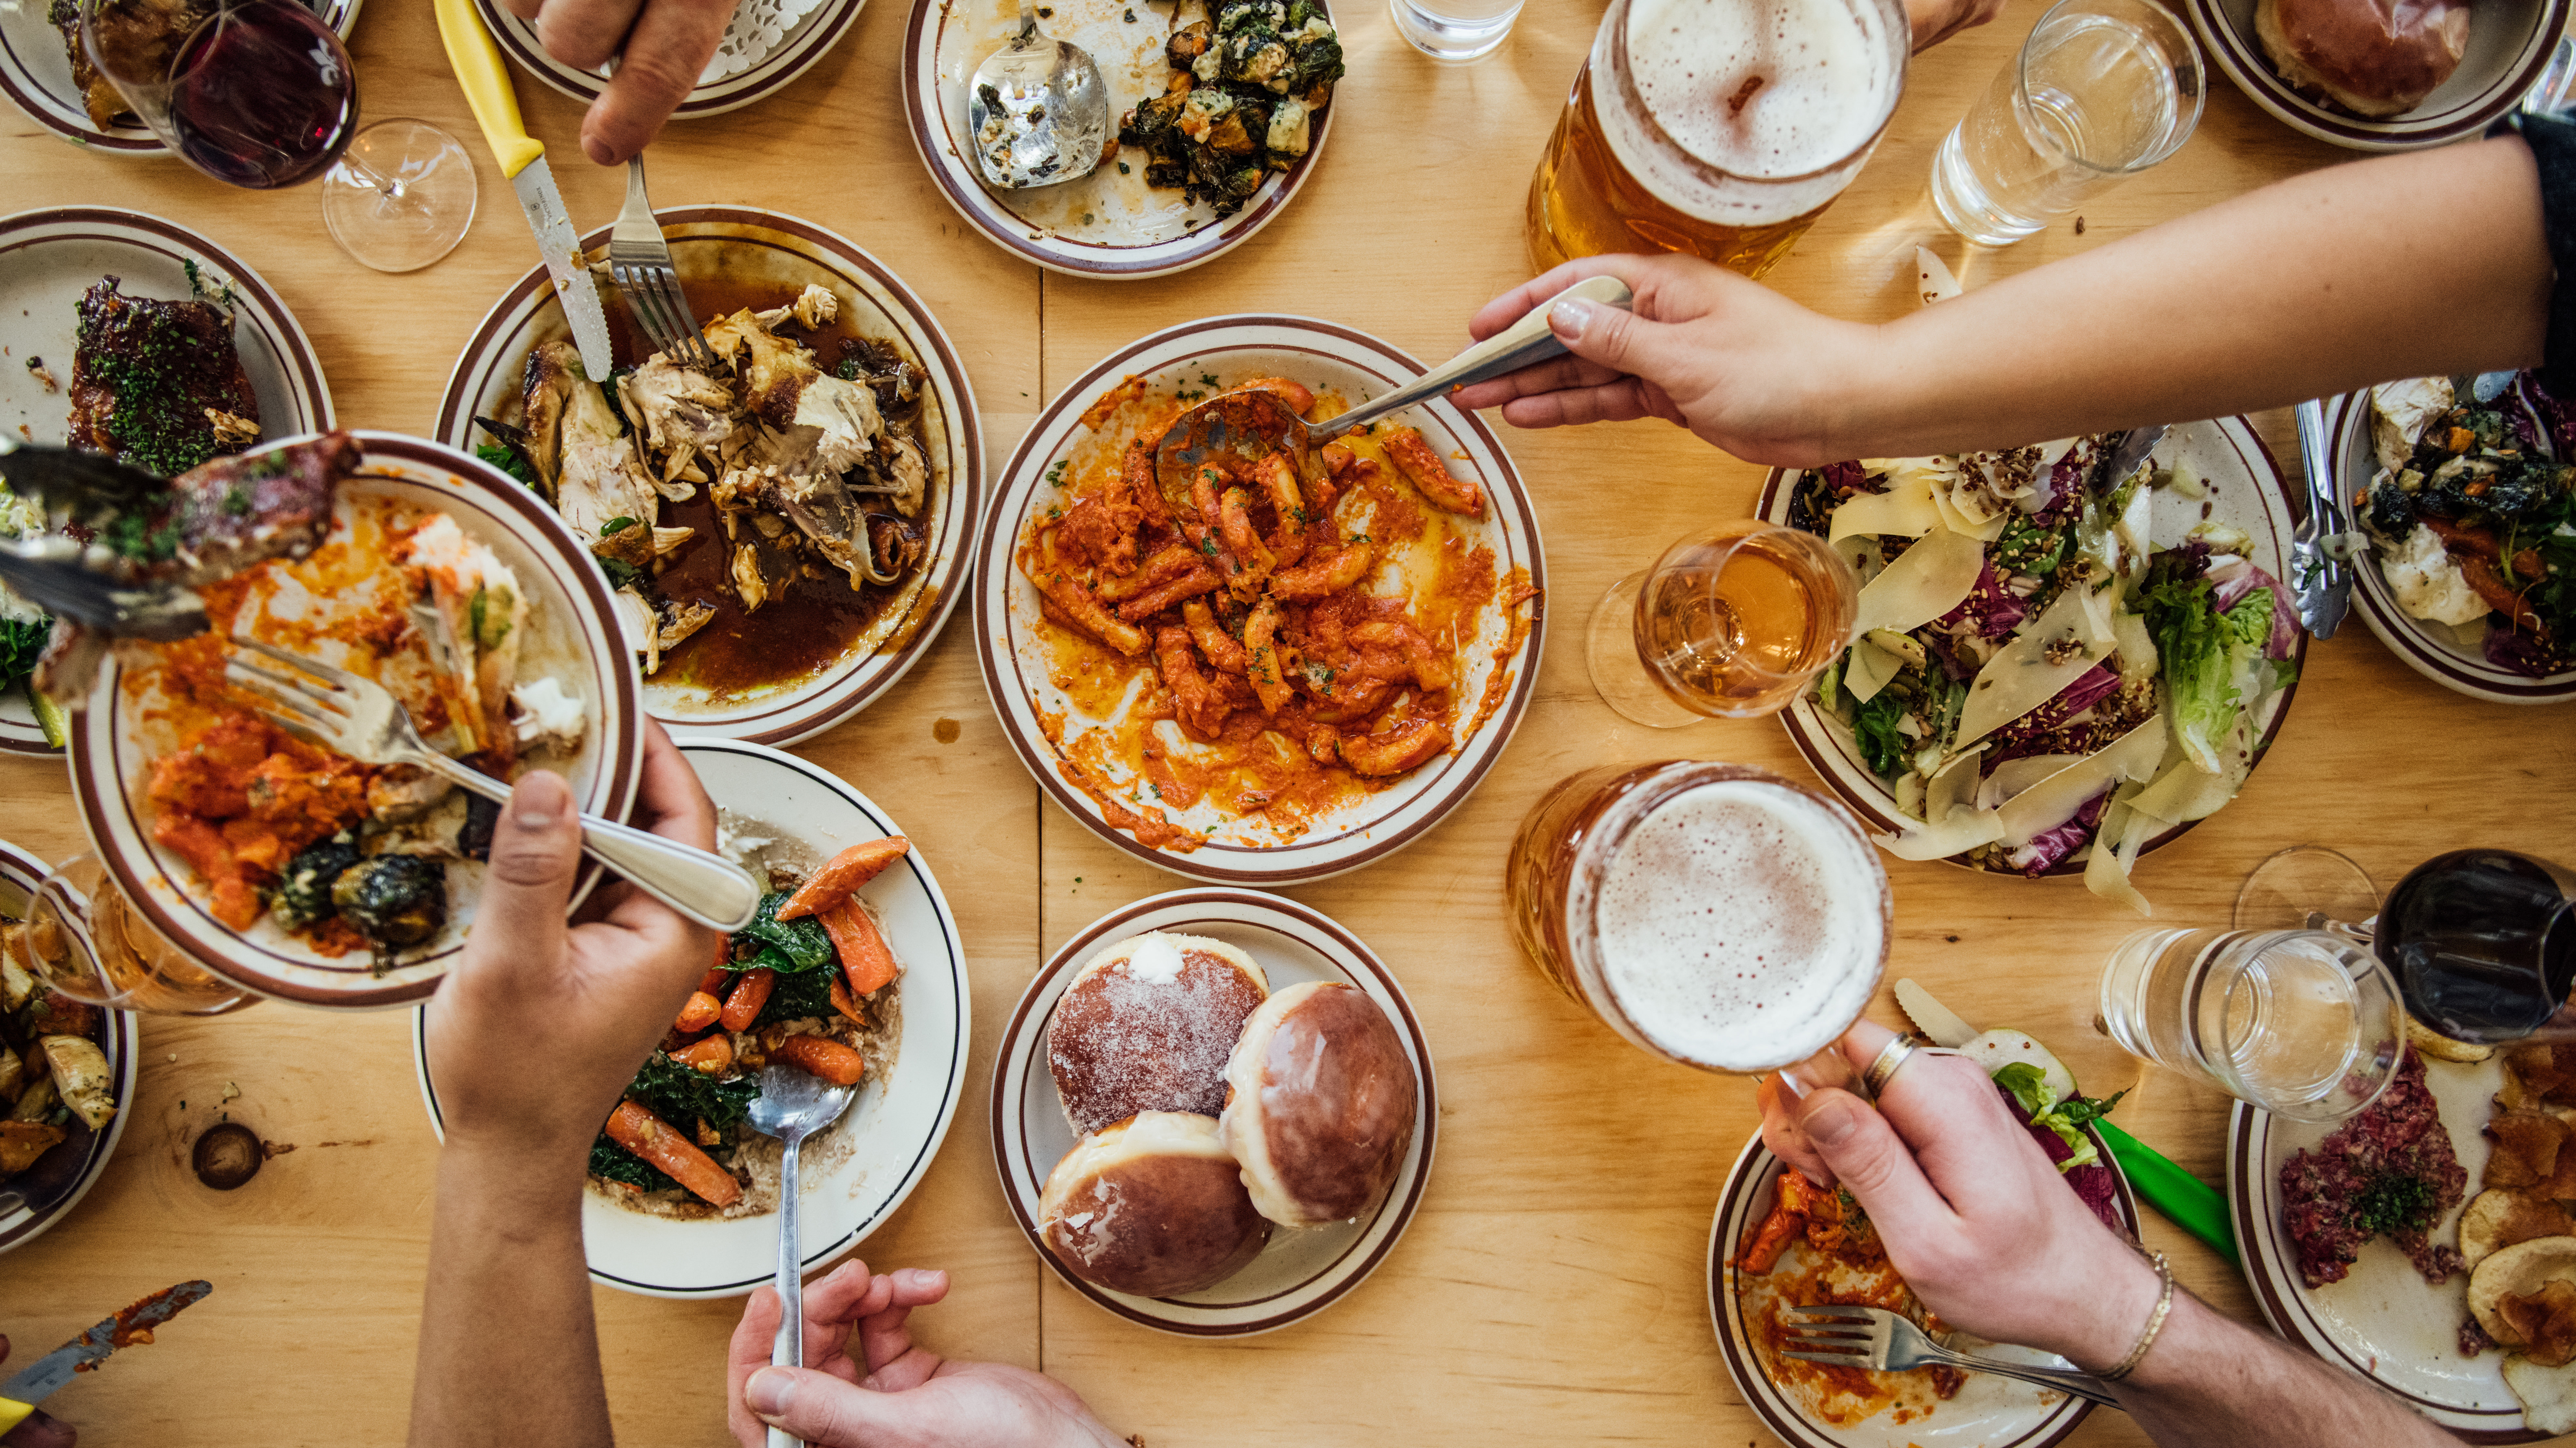 Diners’ hands dig into various dishes on a full table.